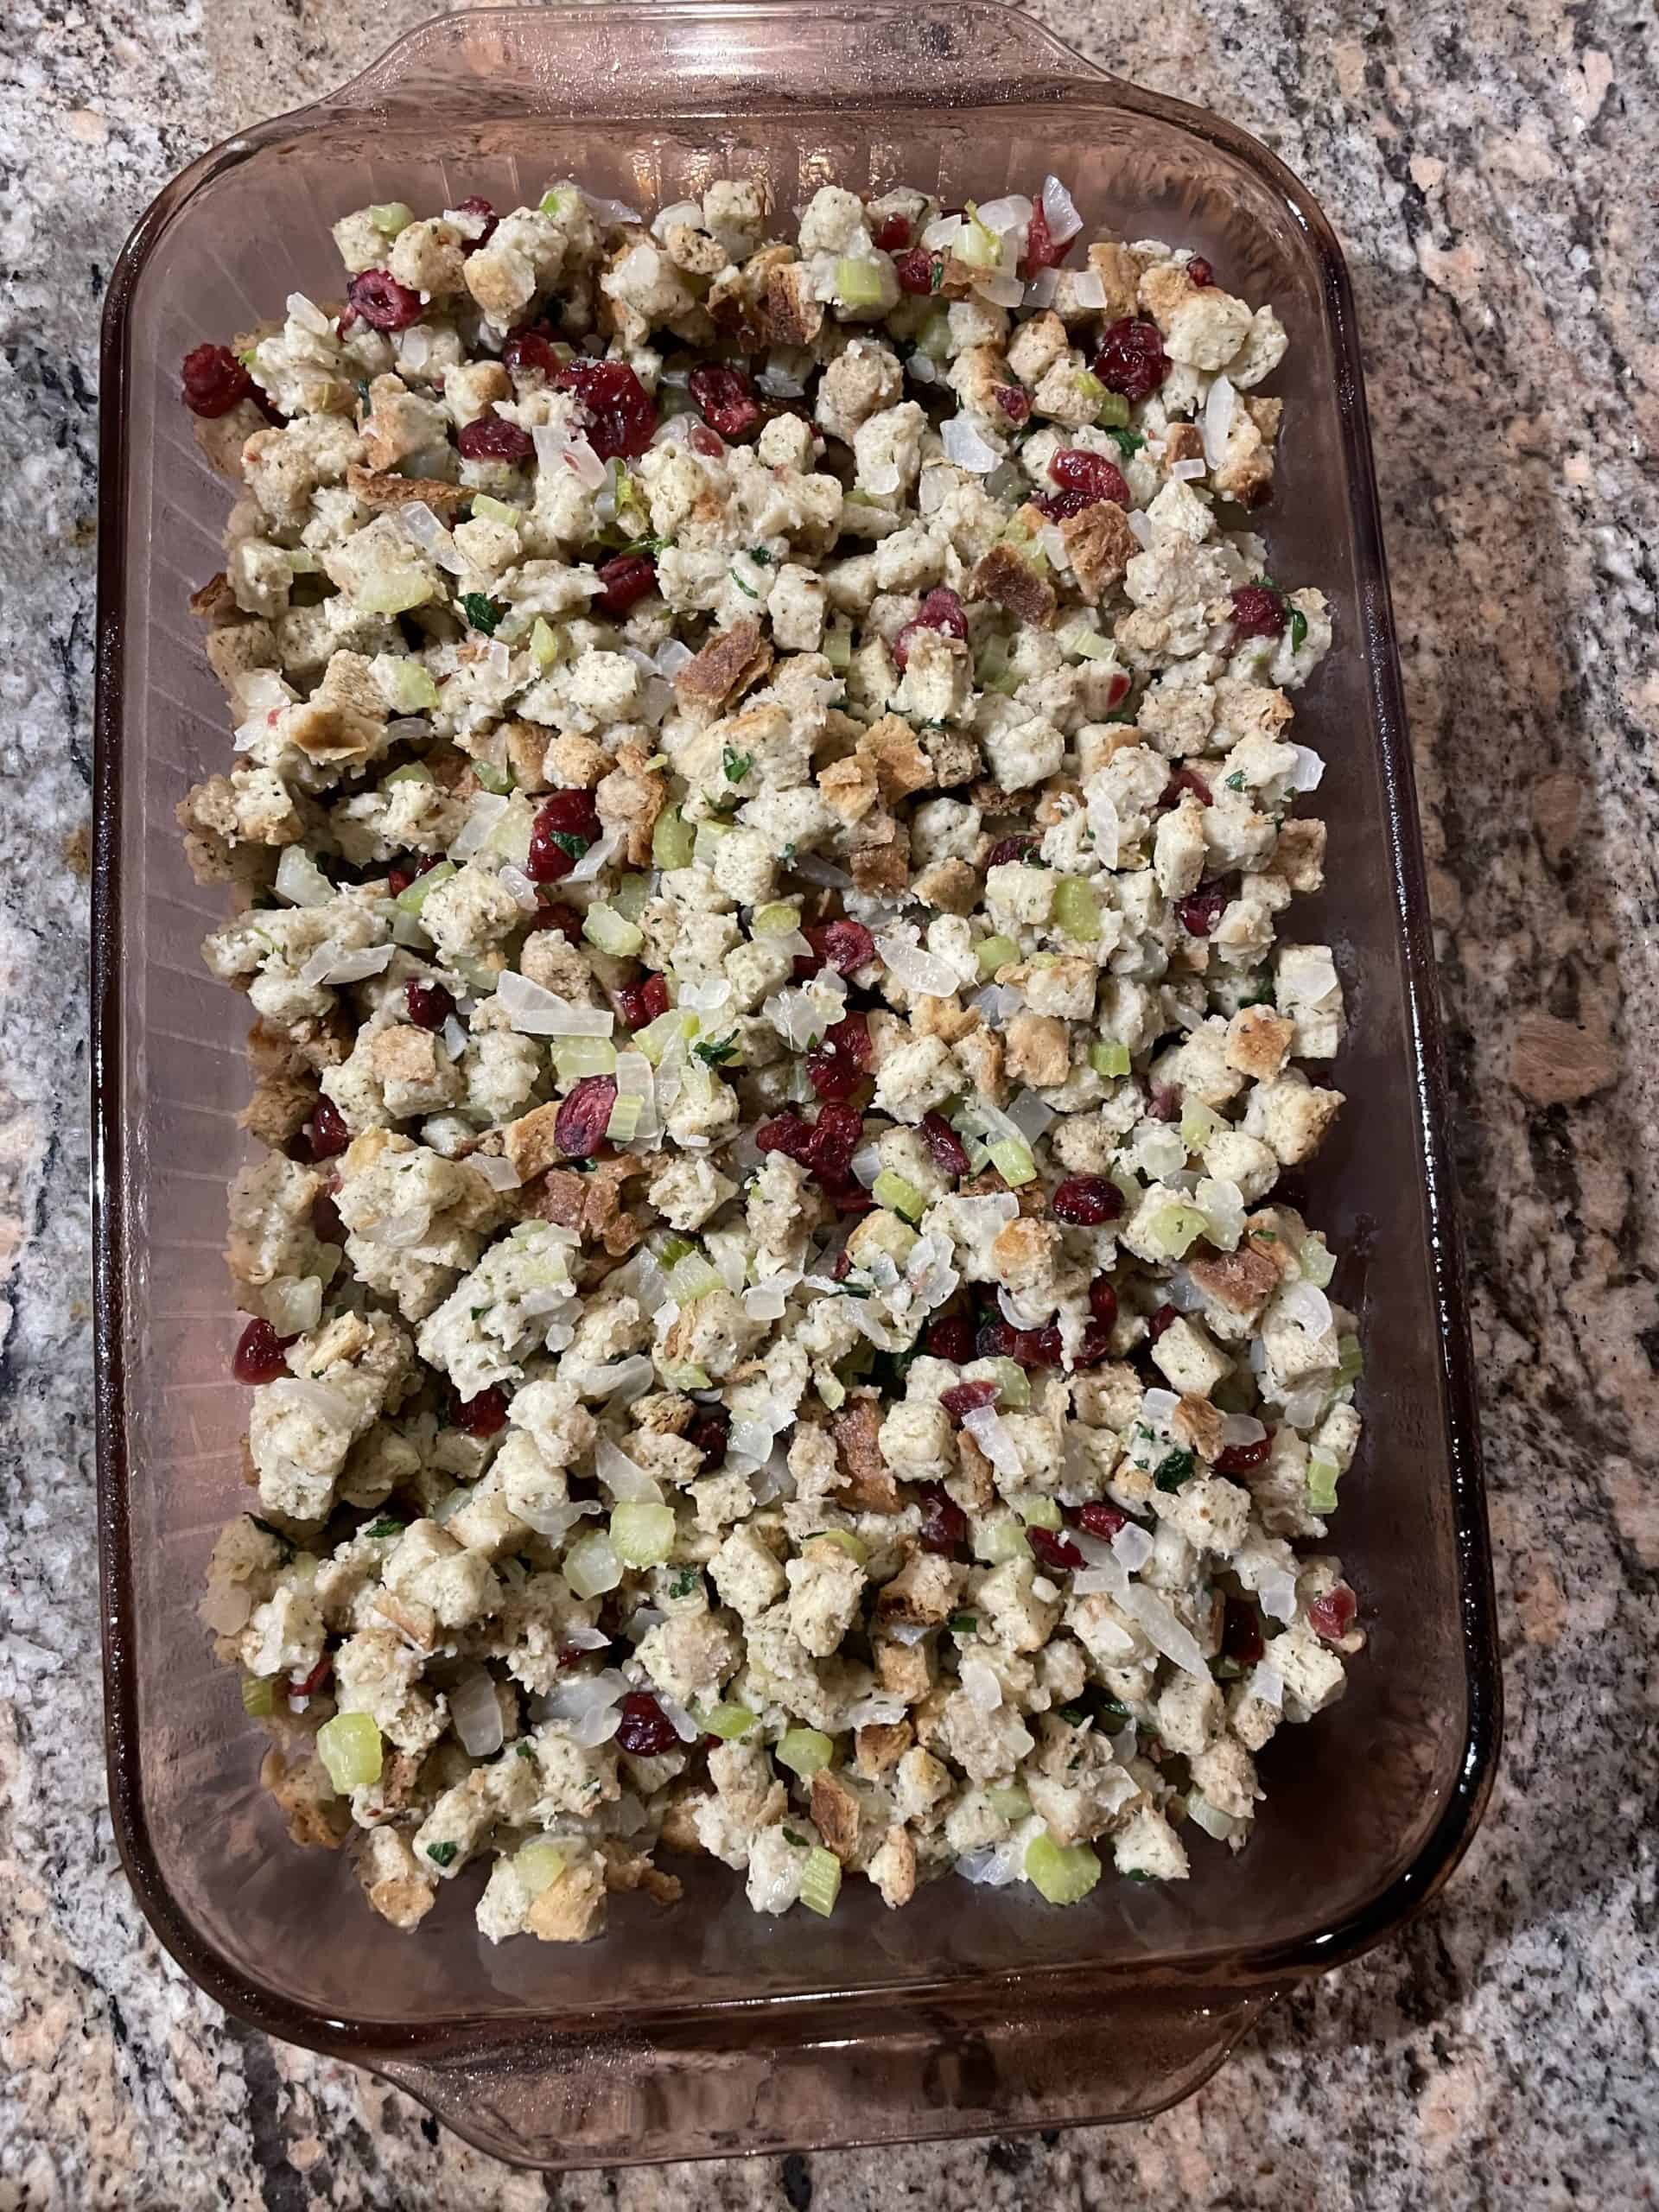 Cranberry Stuffing Recipe in a baking dish.